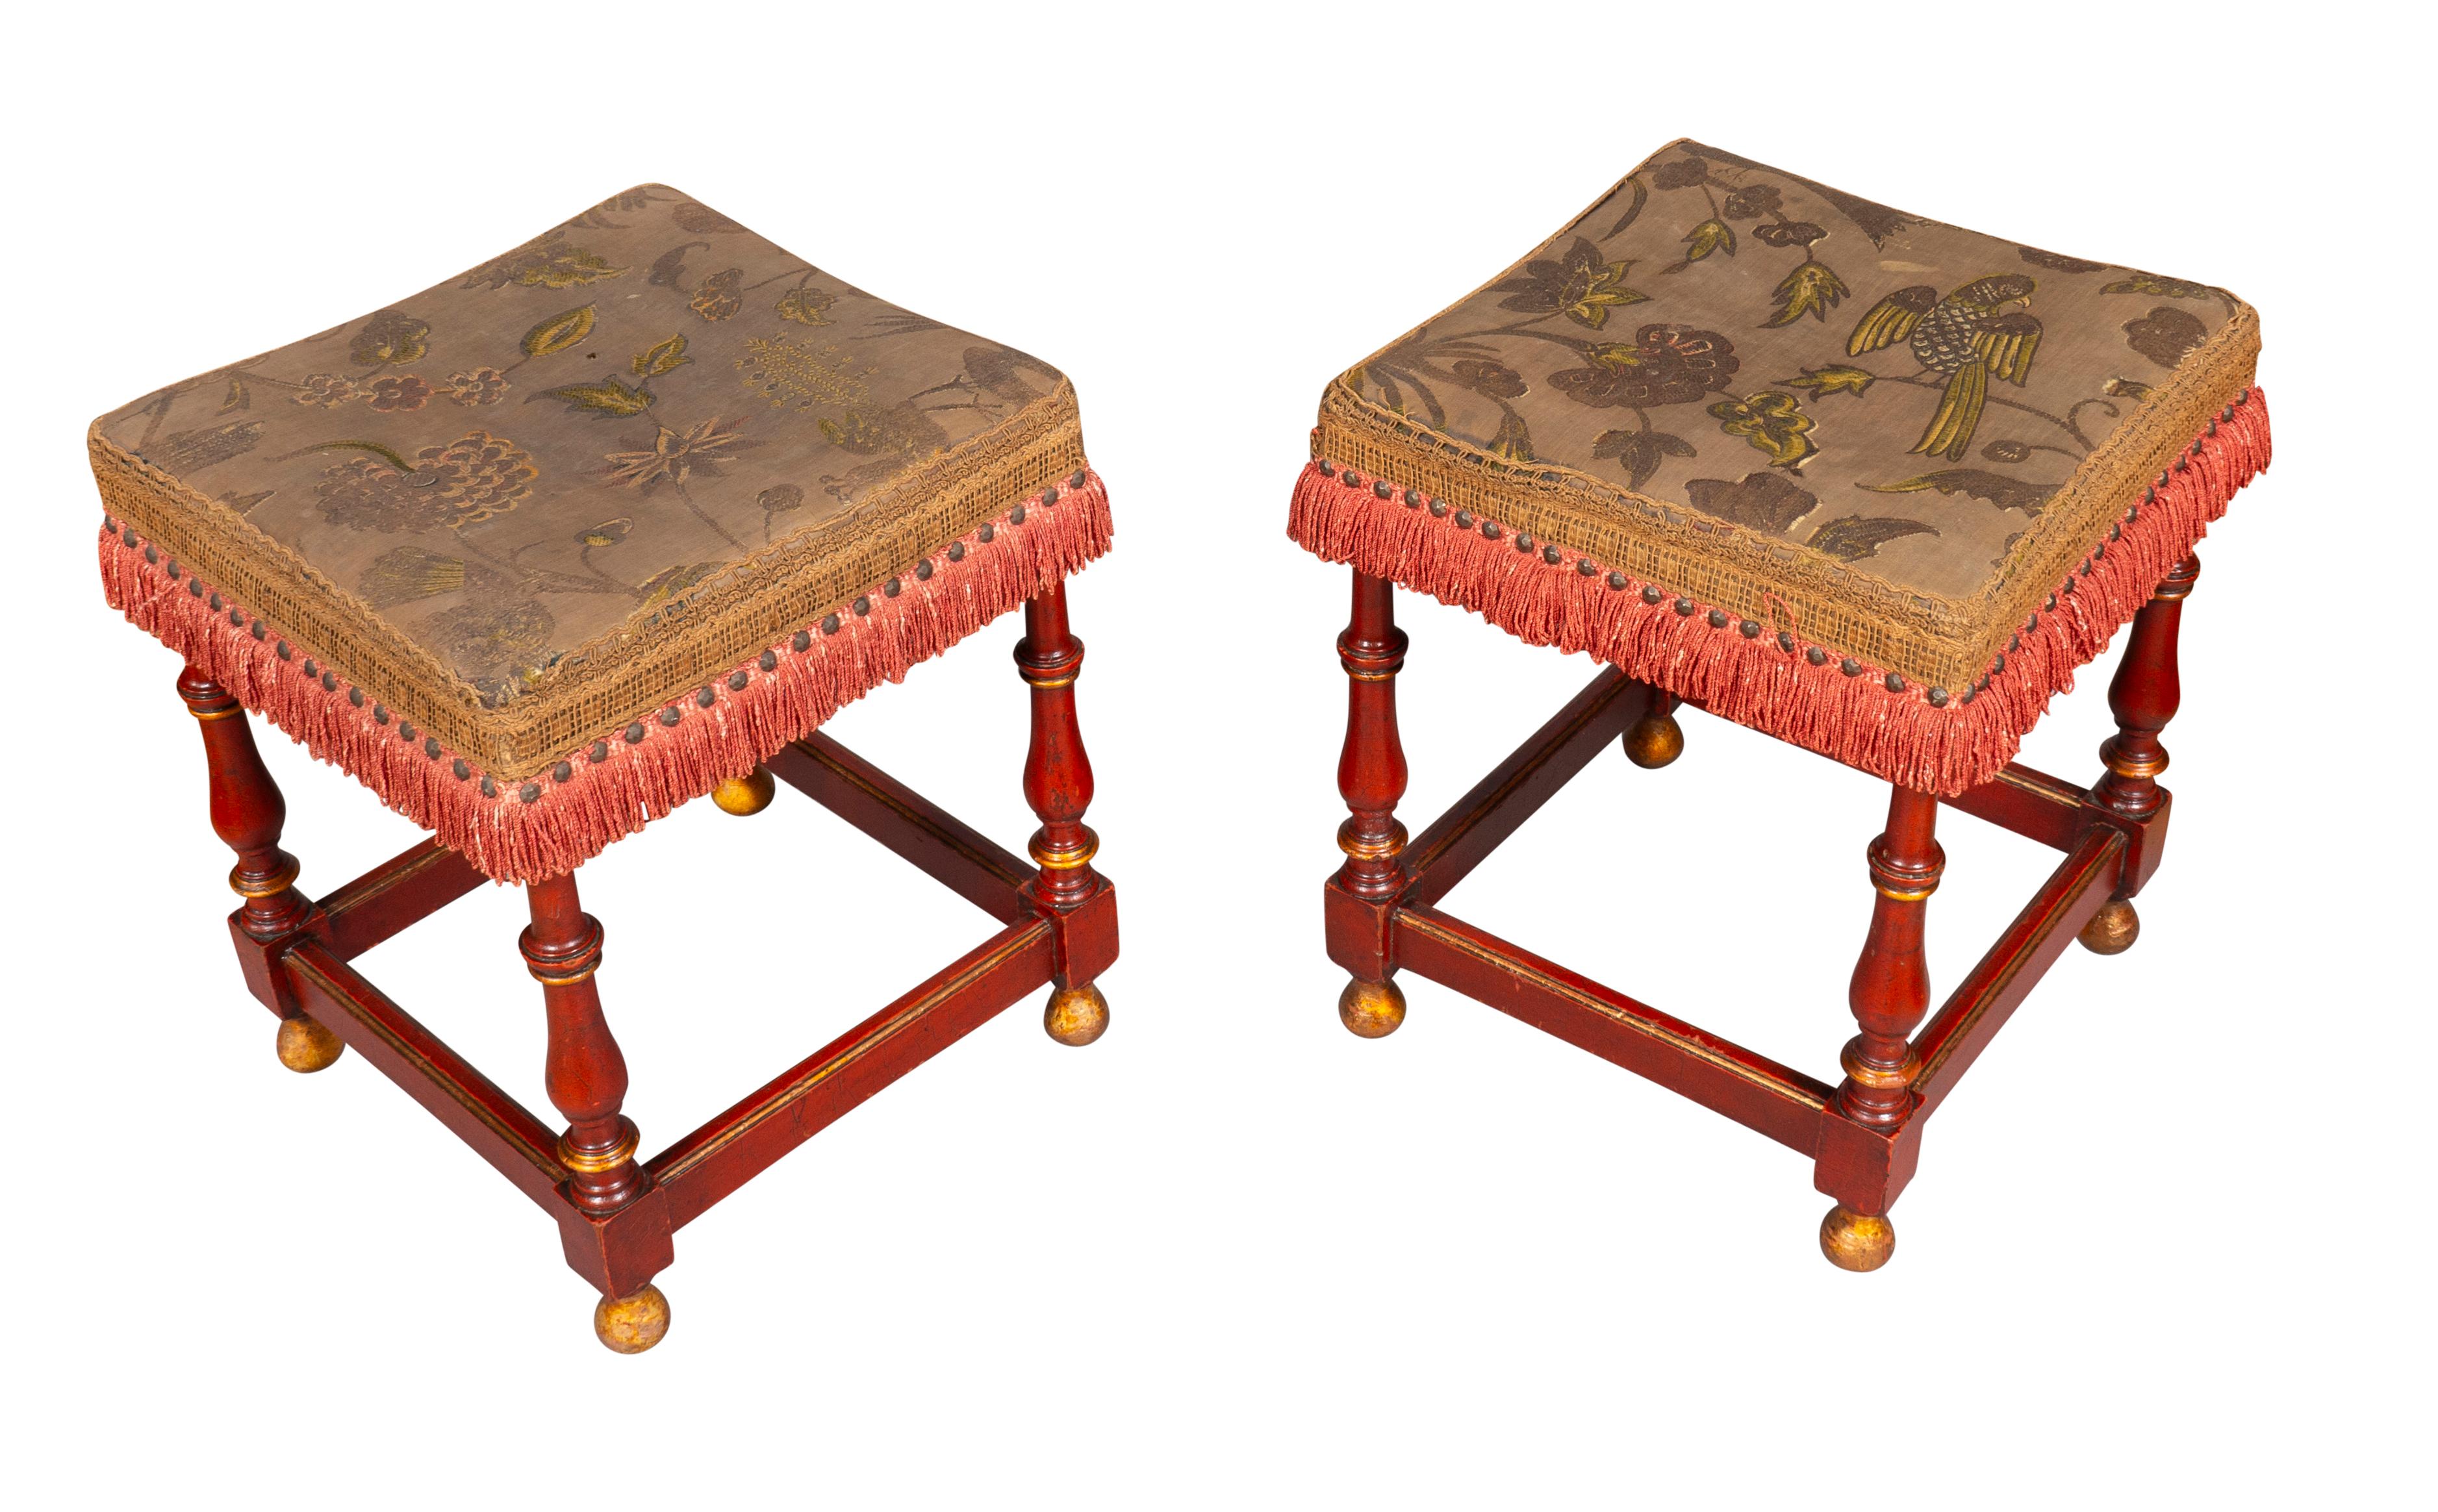 Square with old embroidered seat. Turned legs and stretchers.